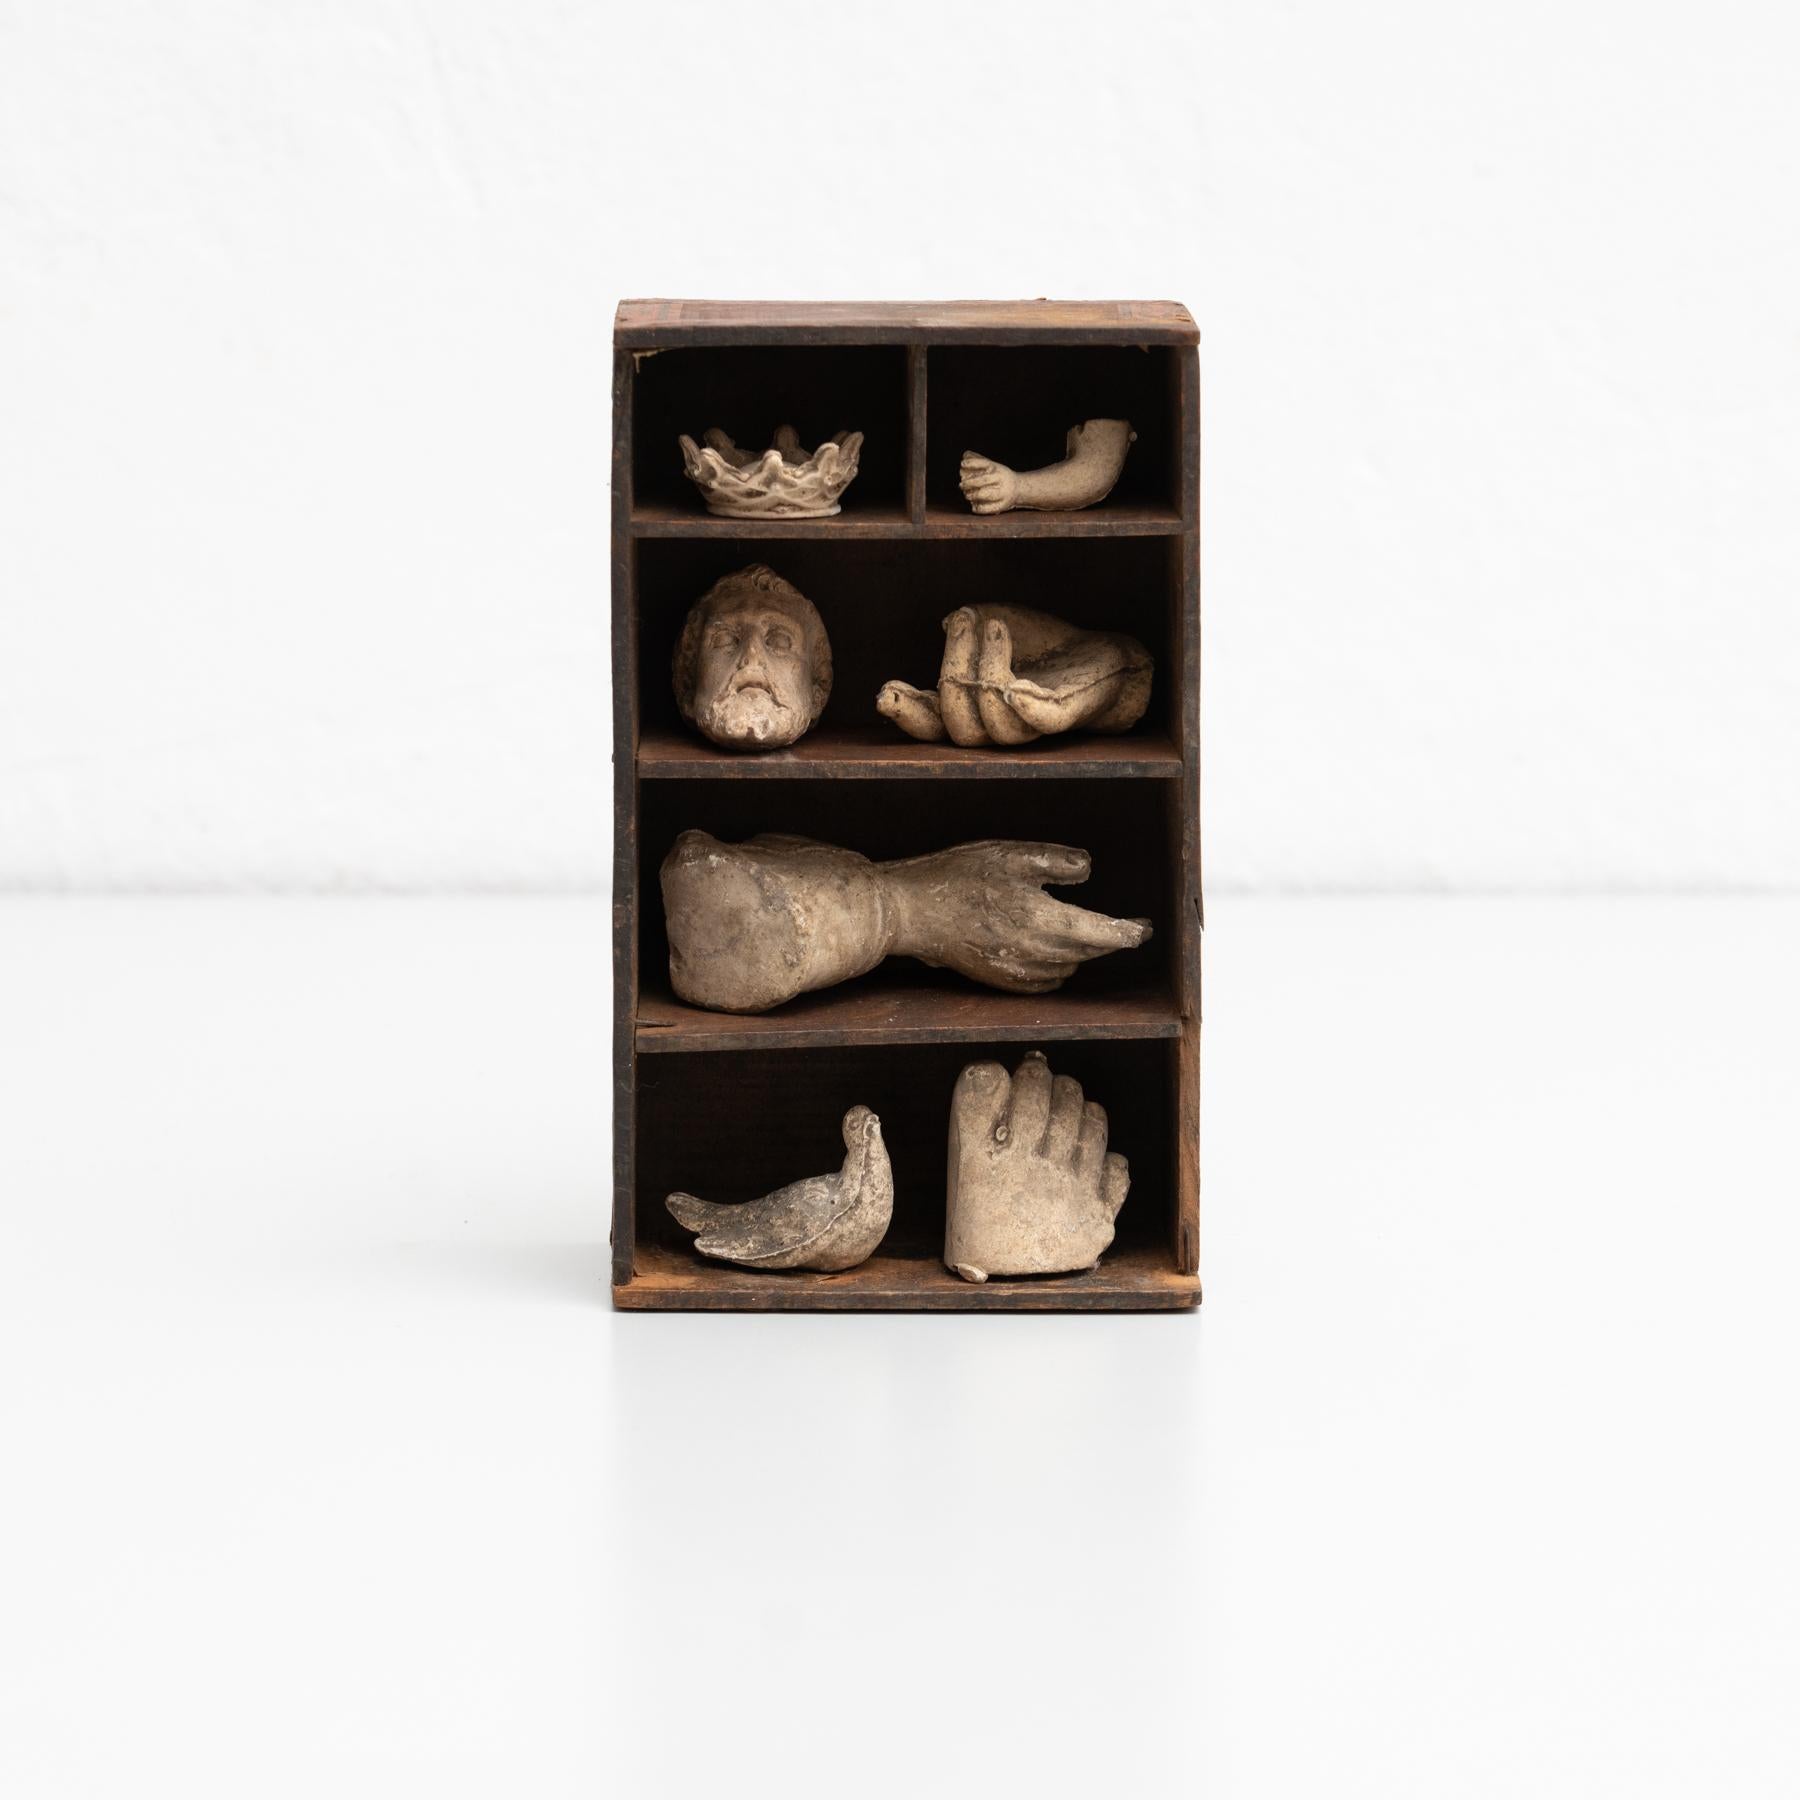 Cabinet of curiosities of plaster figures and pieces in a wooden cabinet.

Made in traditional Catalan atelier in Olot, Spain, circa 1950.

Olot has a long tradition in the production of sculptures and religious imagery. The art and industry of